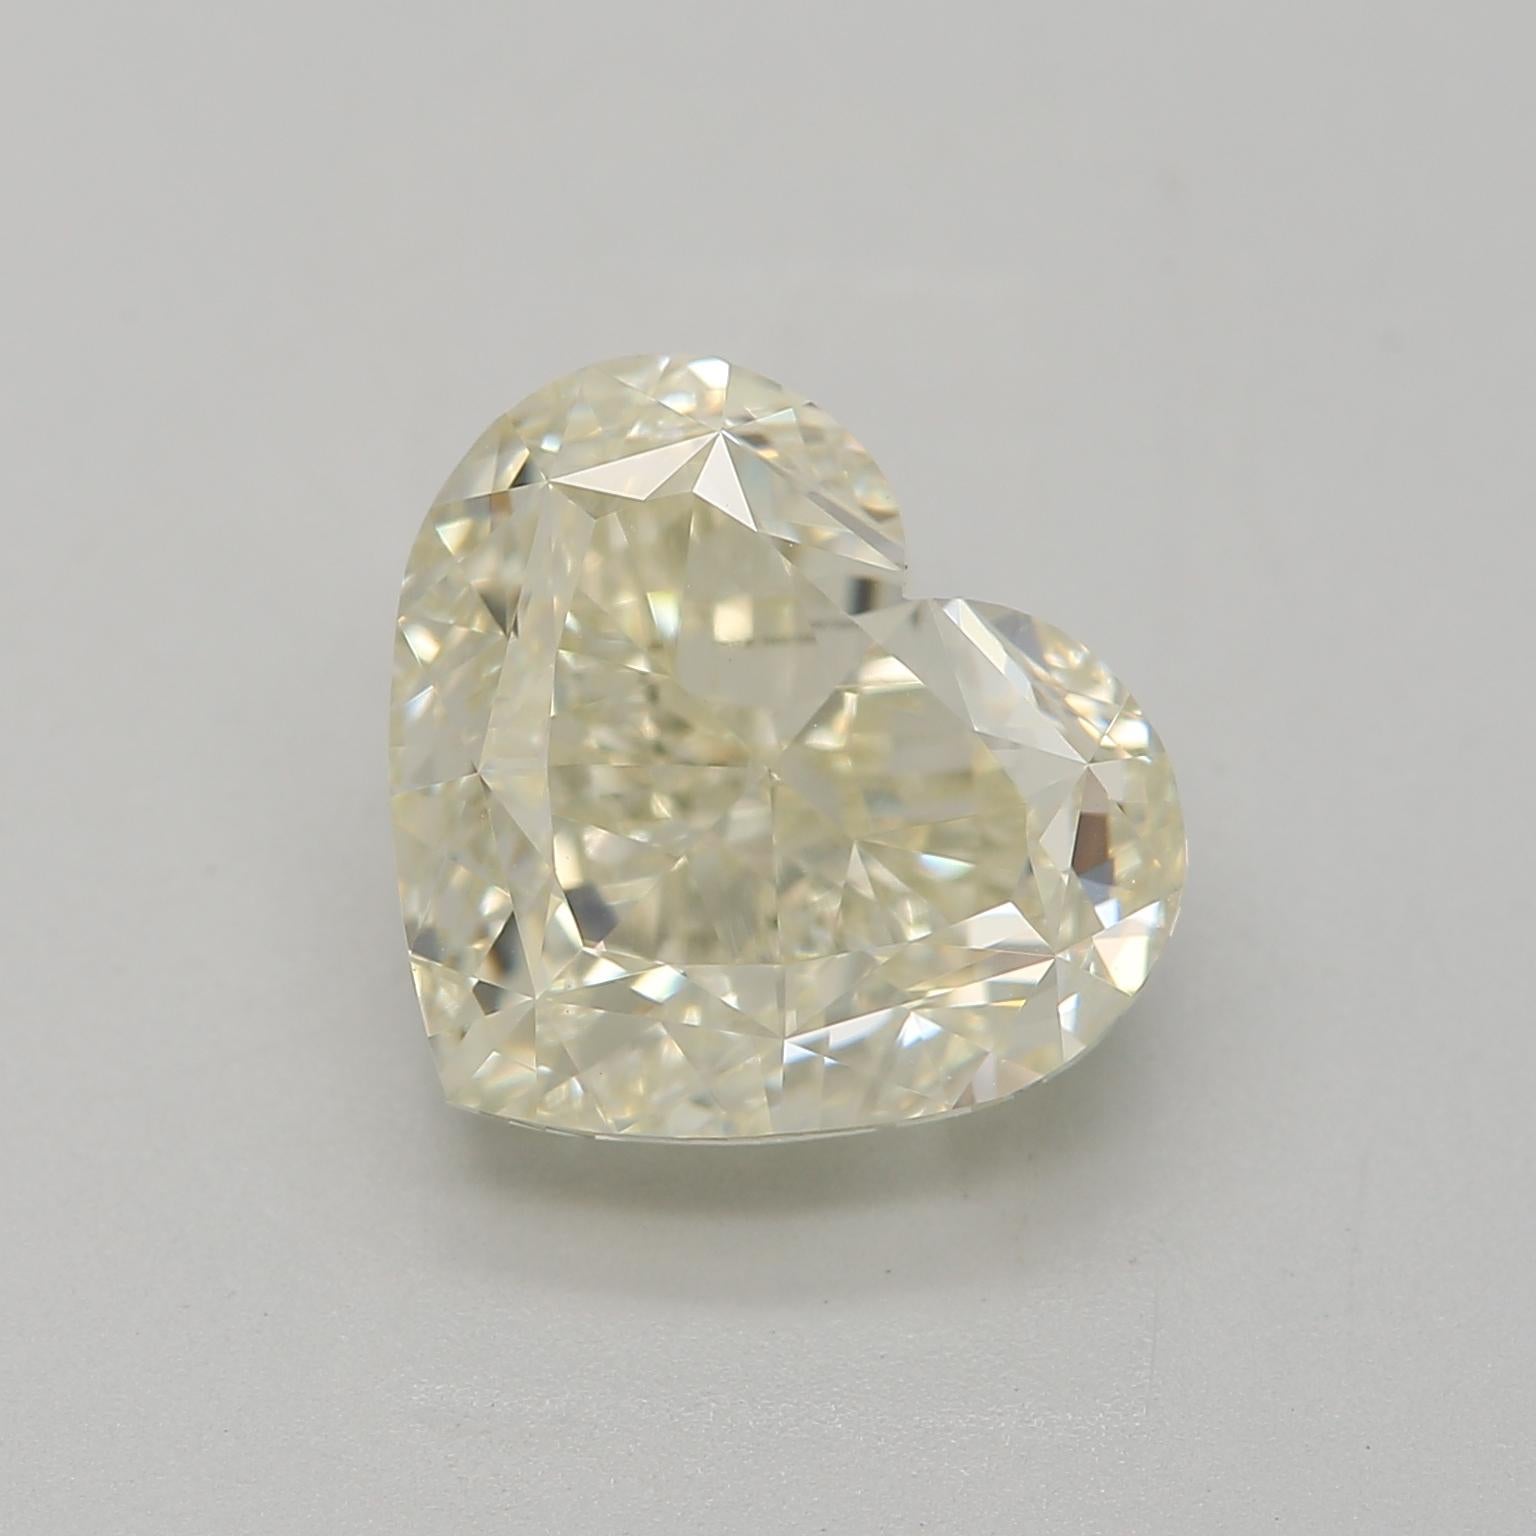 3.00 Carat Heart shaped diamond VS1 Clarity GIA Certified For Sale 1